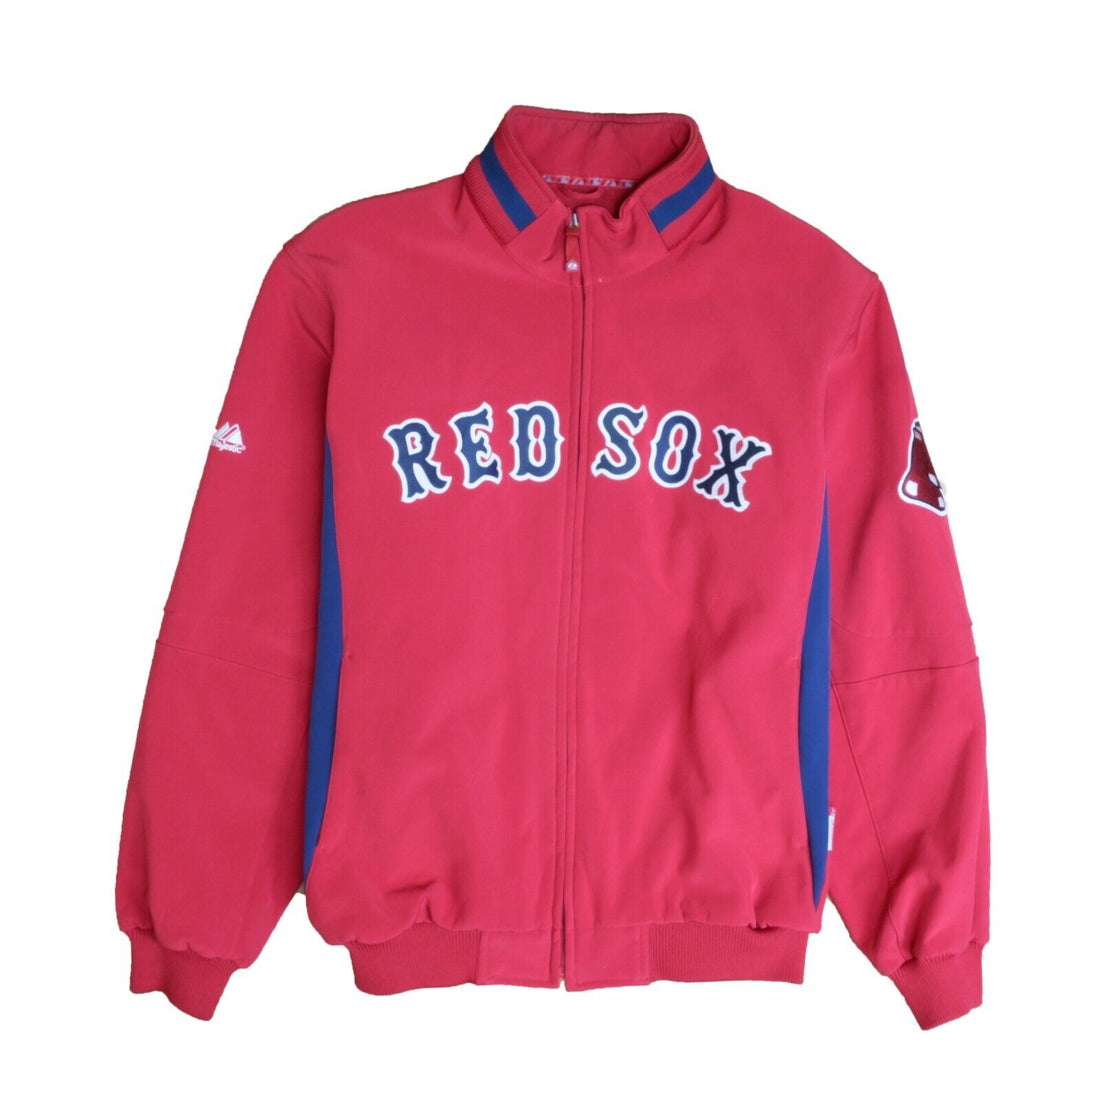 Boston Red Sox Majestic Dugout Bomber Jacket Size XL Red Therma Base MLB